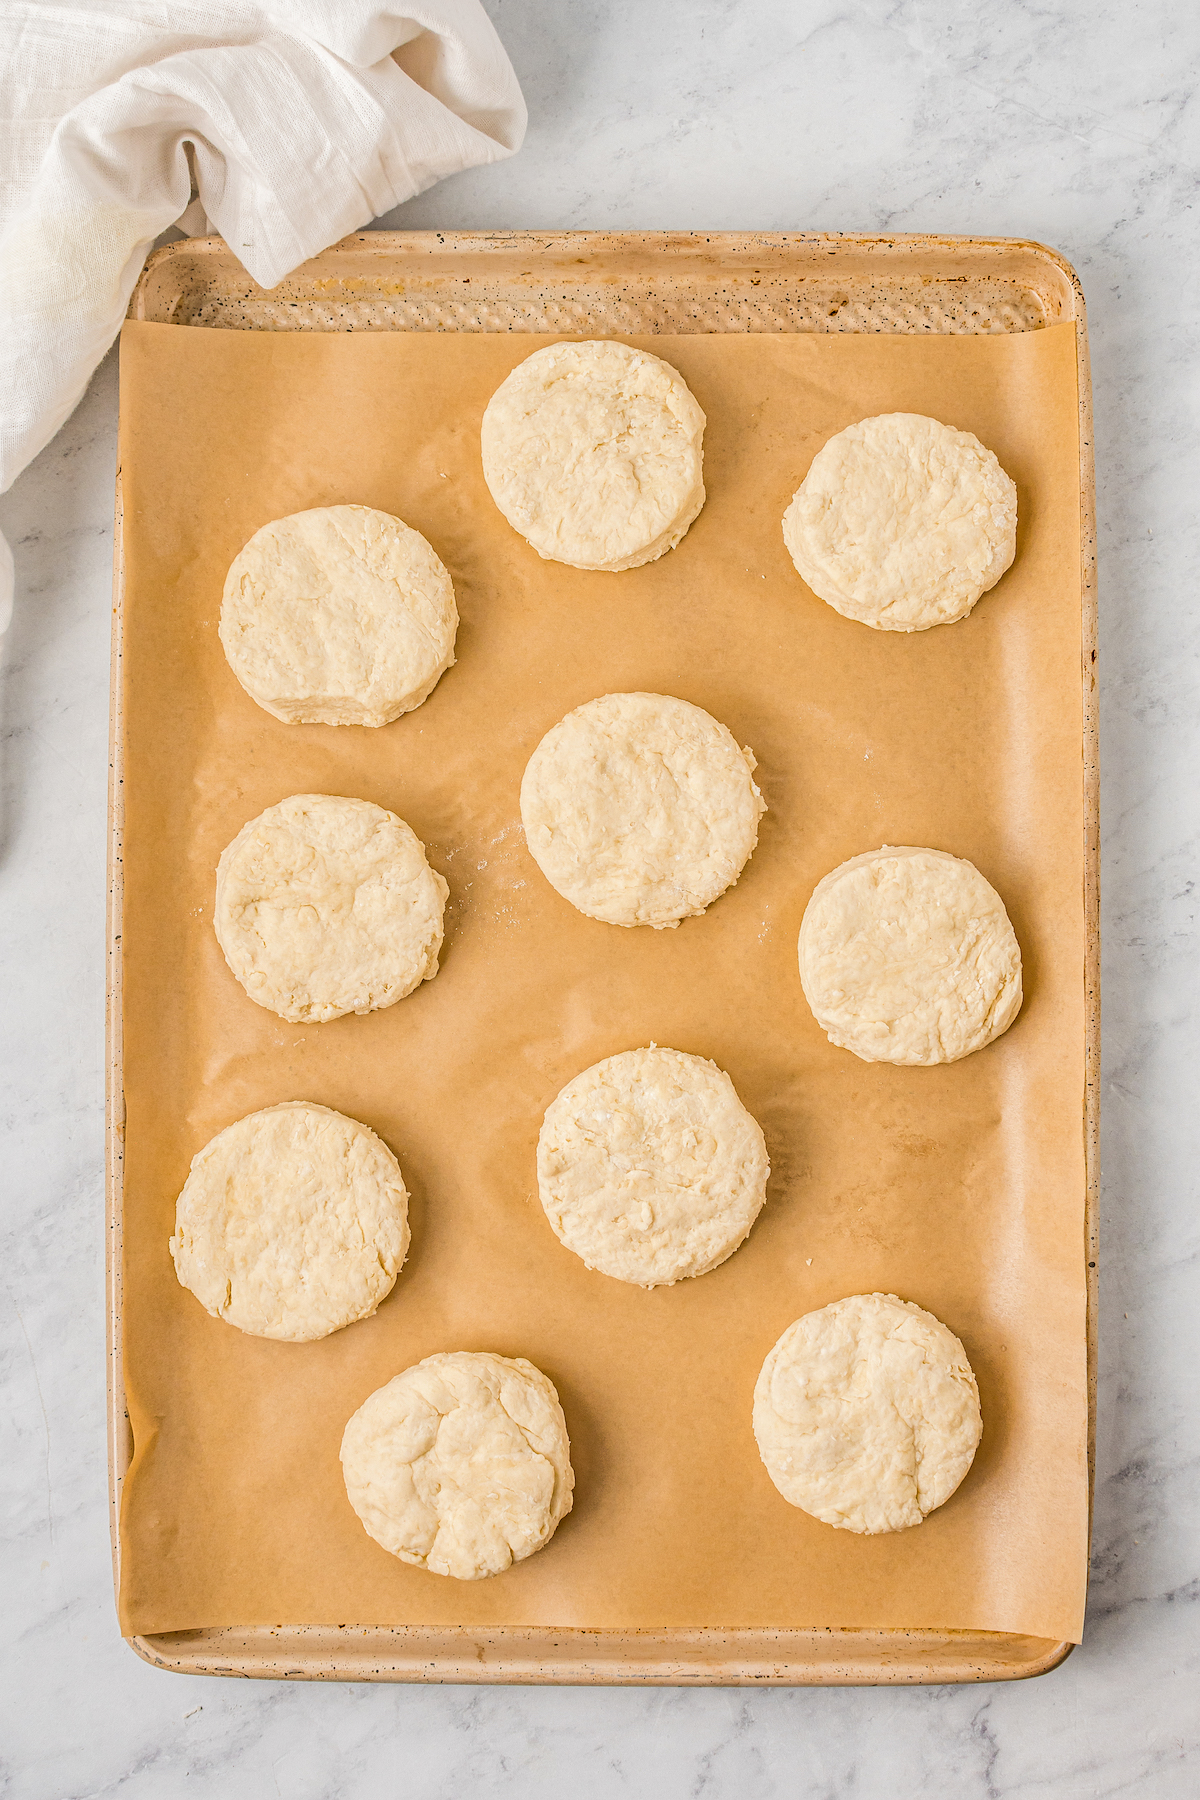 Unbaked biscuits on a parchment-lined baking sheet.